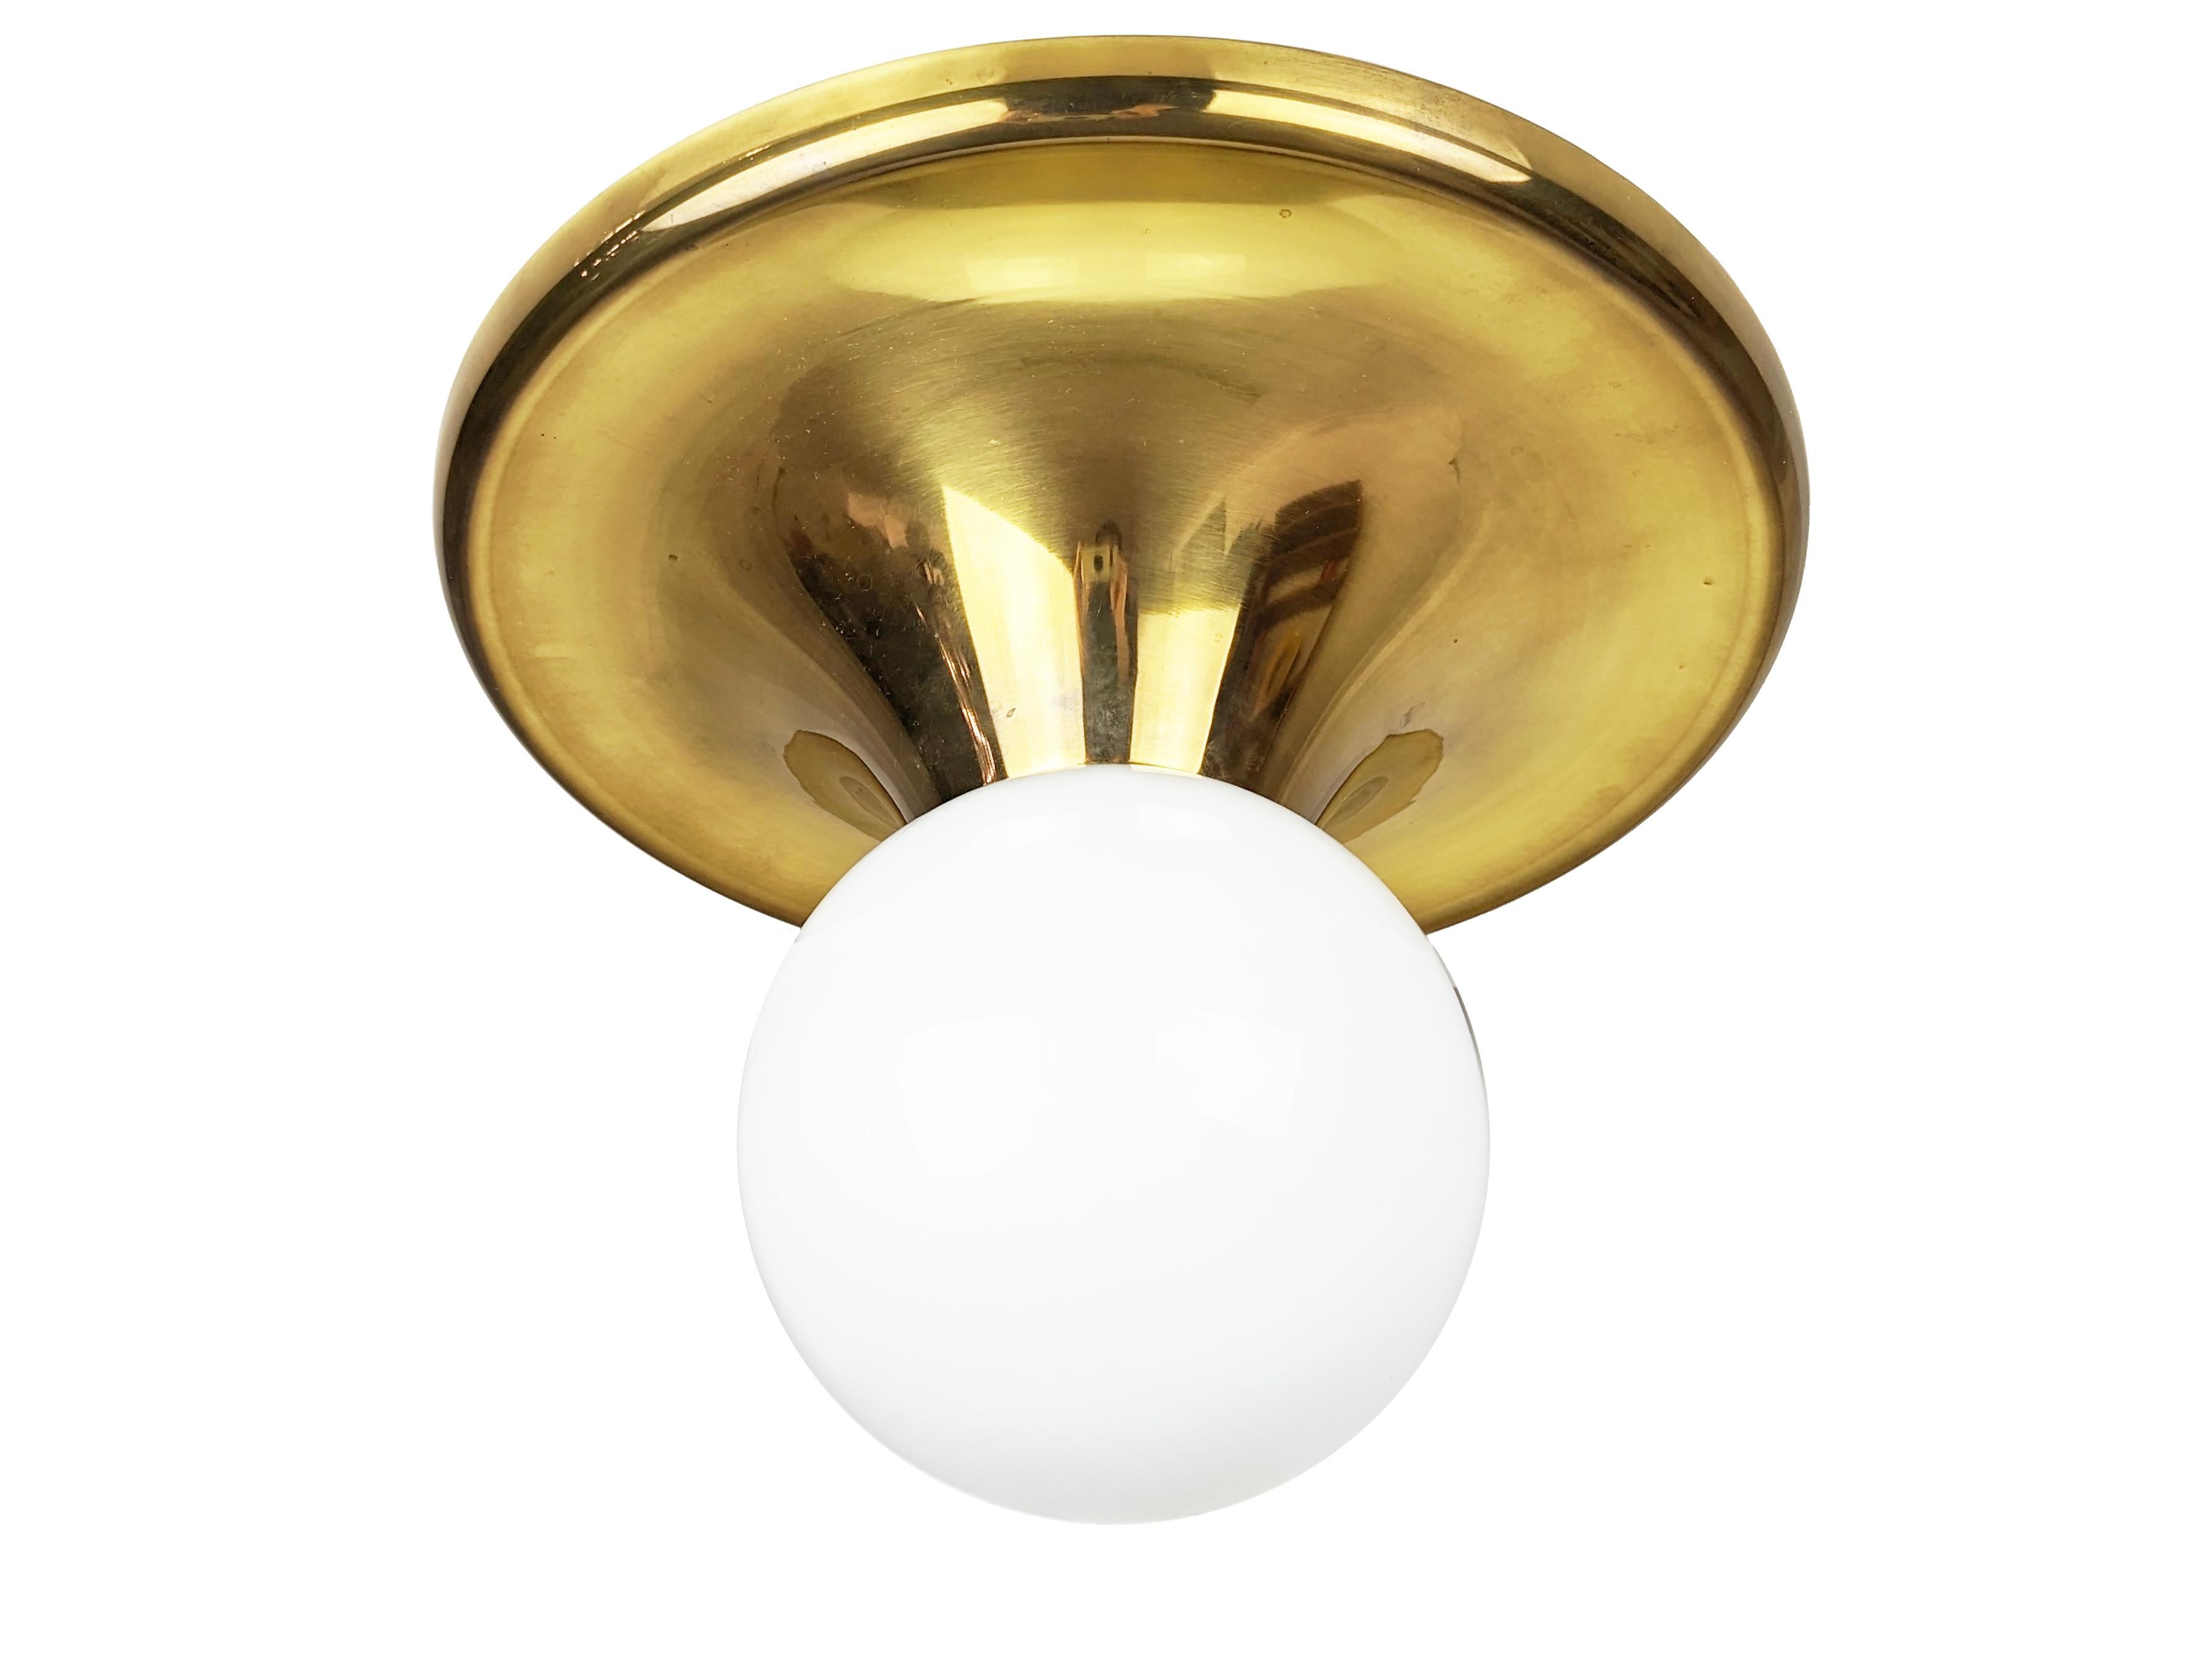 Larger version (cm 40 diameter) of the light ball serie designed by Achille Castiglioni for Arteluce and Flos in 1960s. Aluminum & polished brass body with white opaline shade. Very good condition.